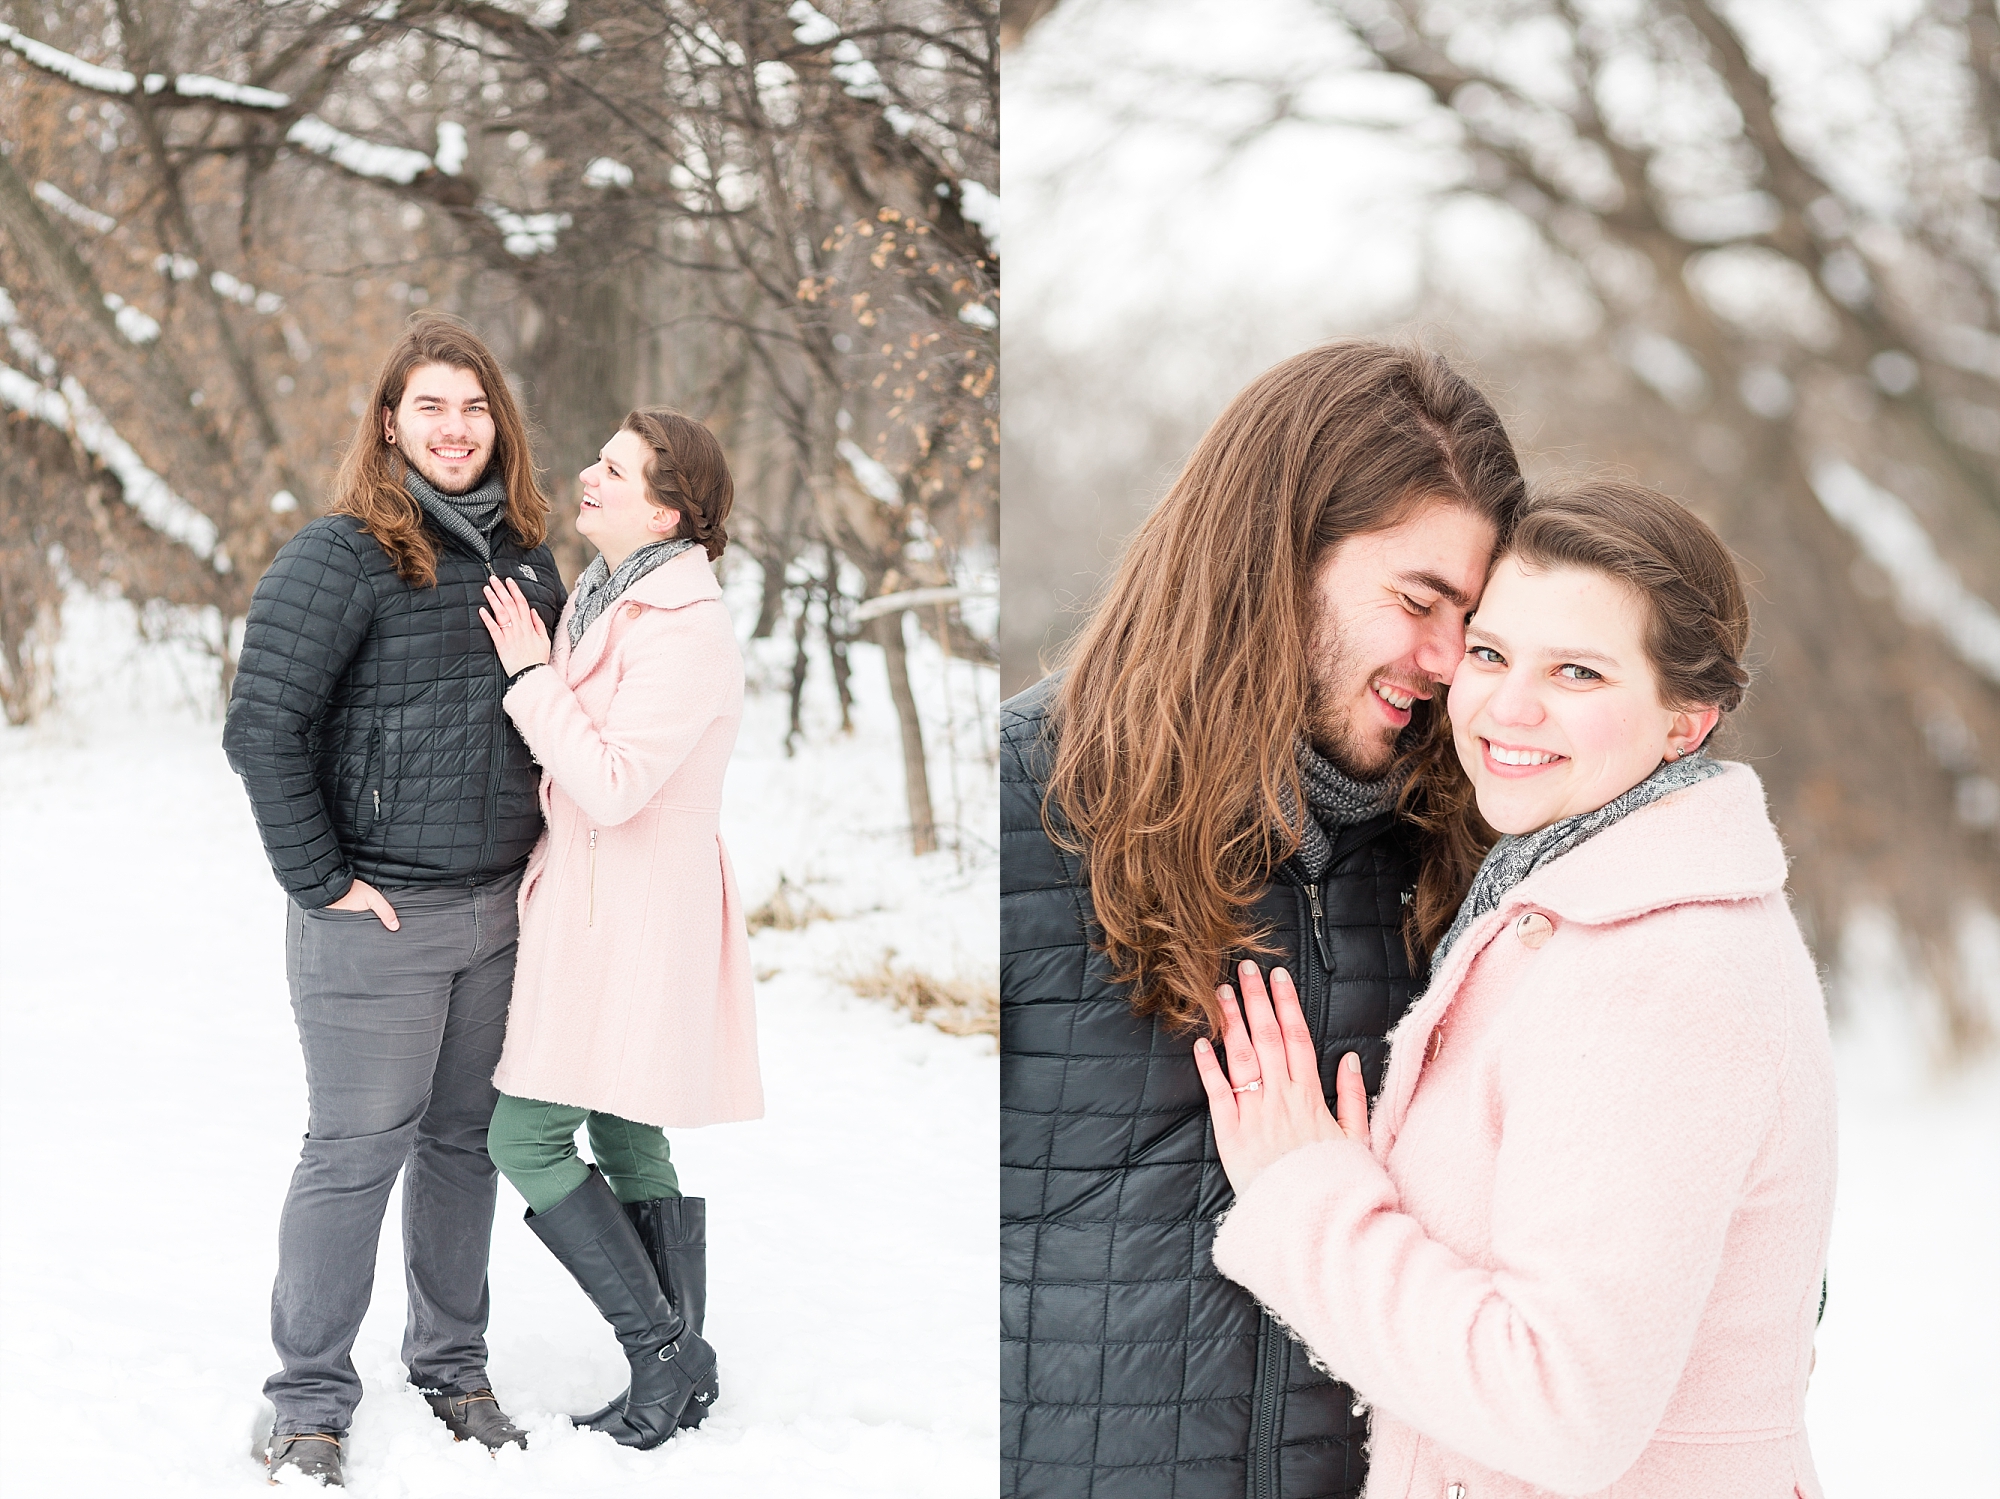 Engagement Photos with women in pink jacket and man in black jacket with long hair